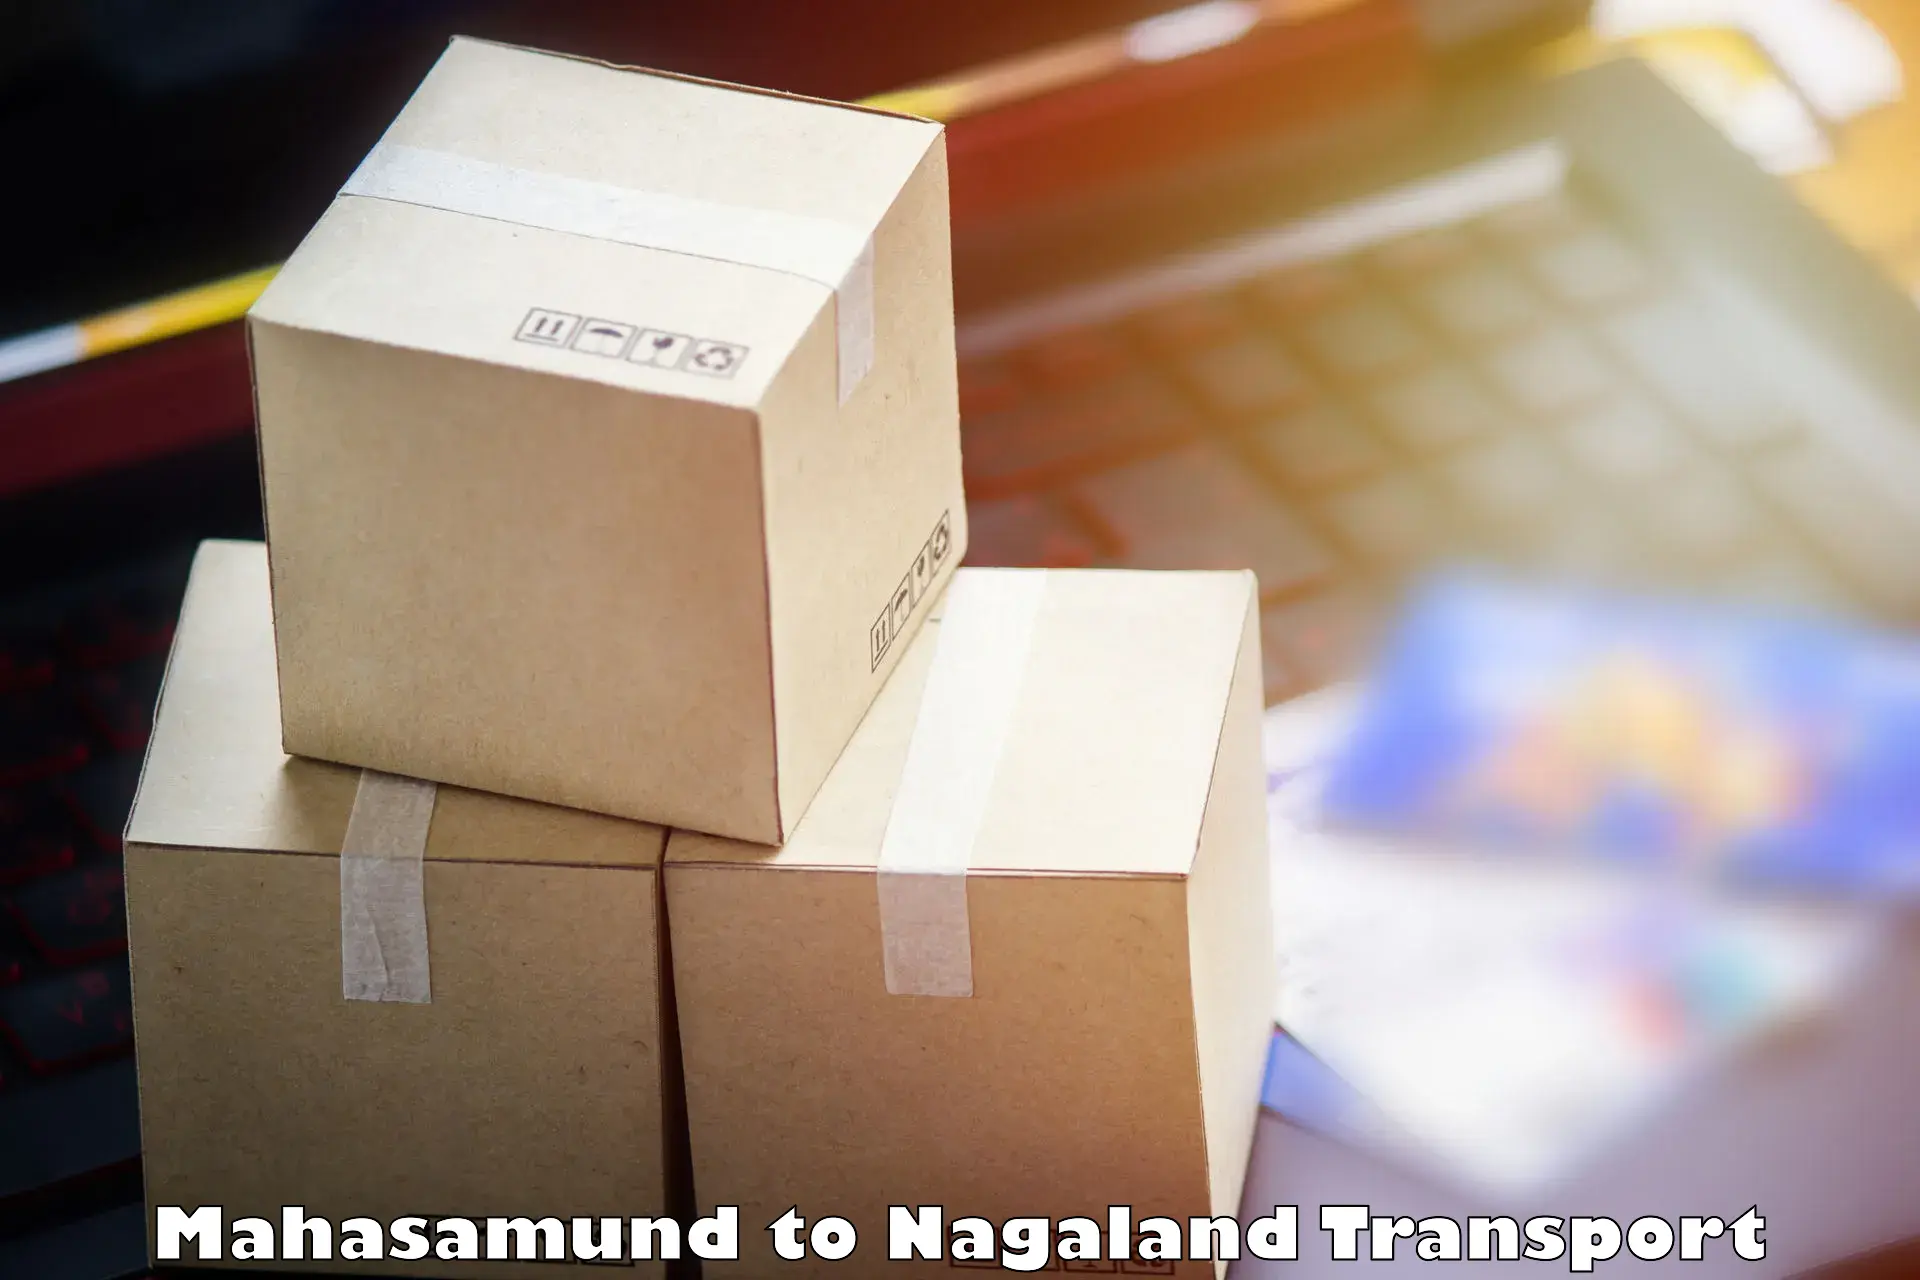 Goods delivery service Mahasamund to Nagaland